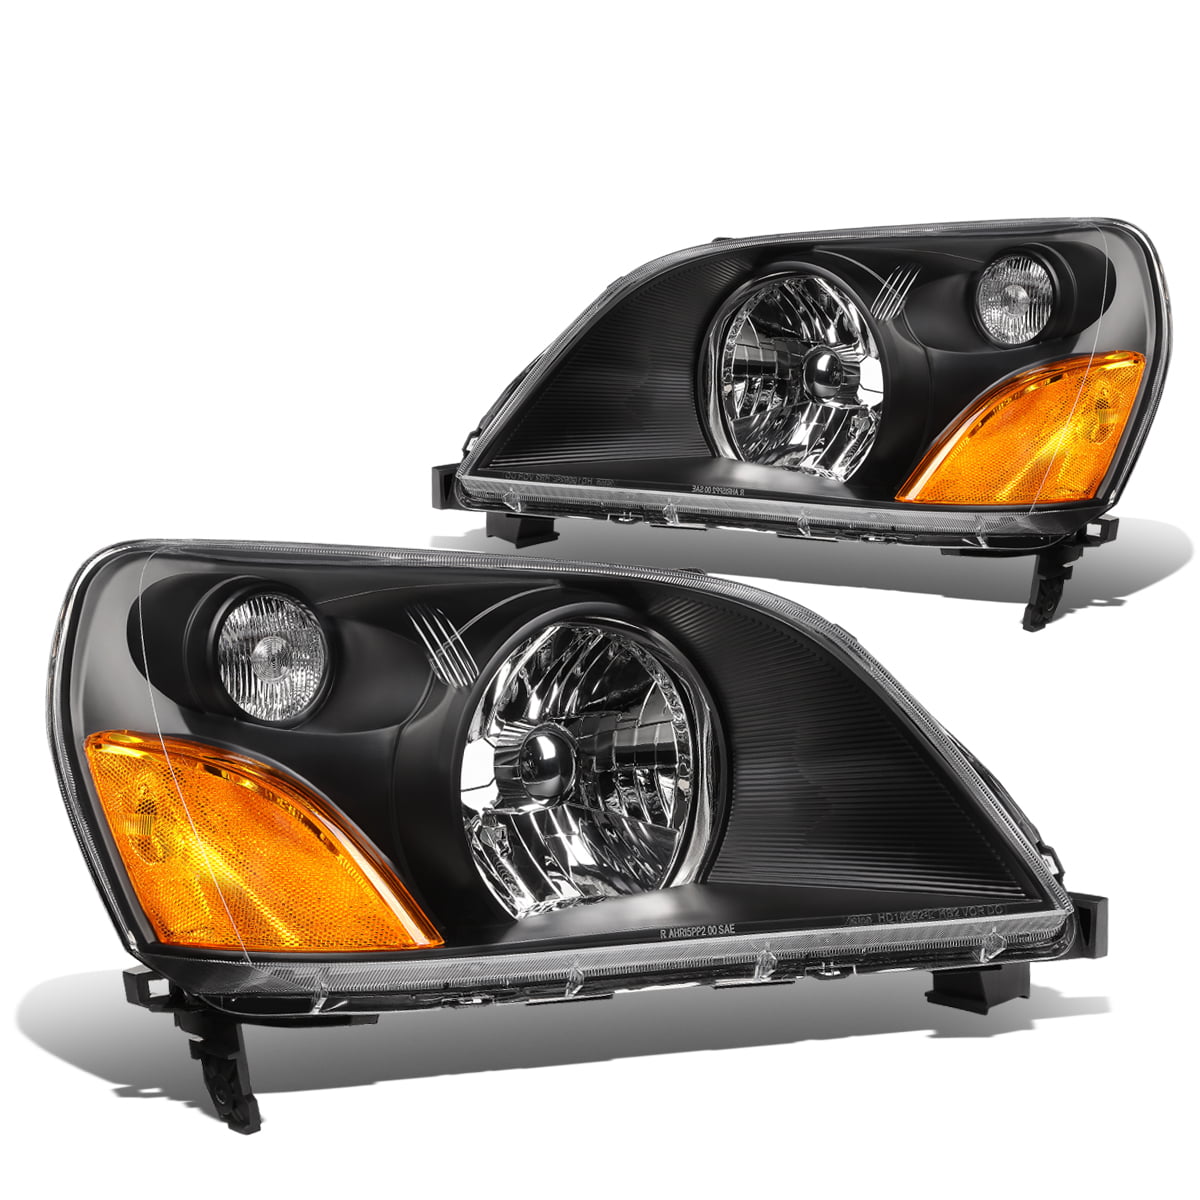 for 03-05 Honda Pilot DNA Motoring Chrome clear HL-OH-046-CH-CL1 Pair of Headlight Assembly